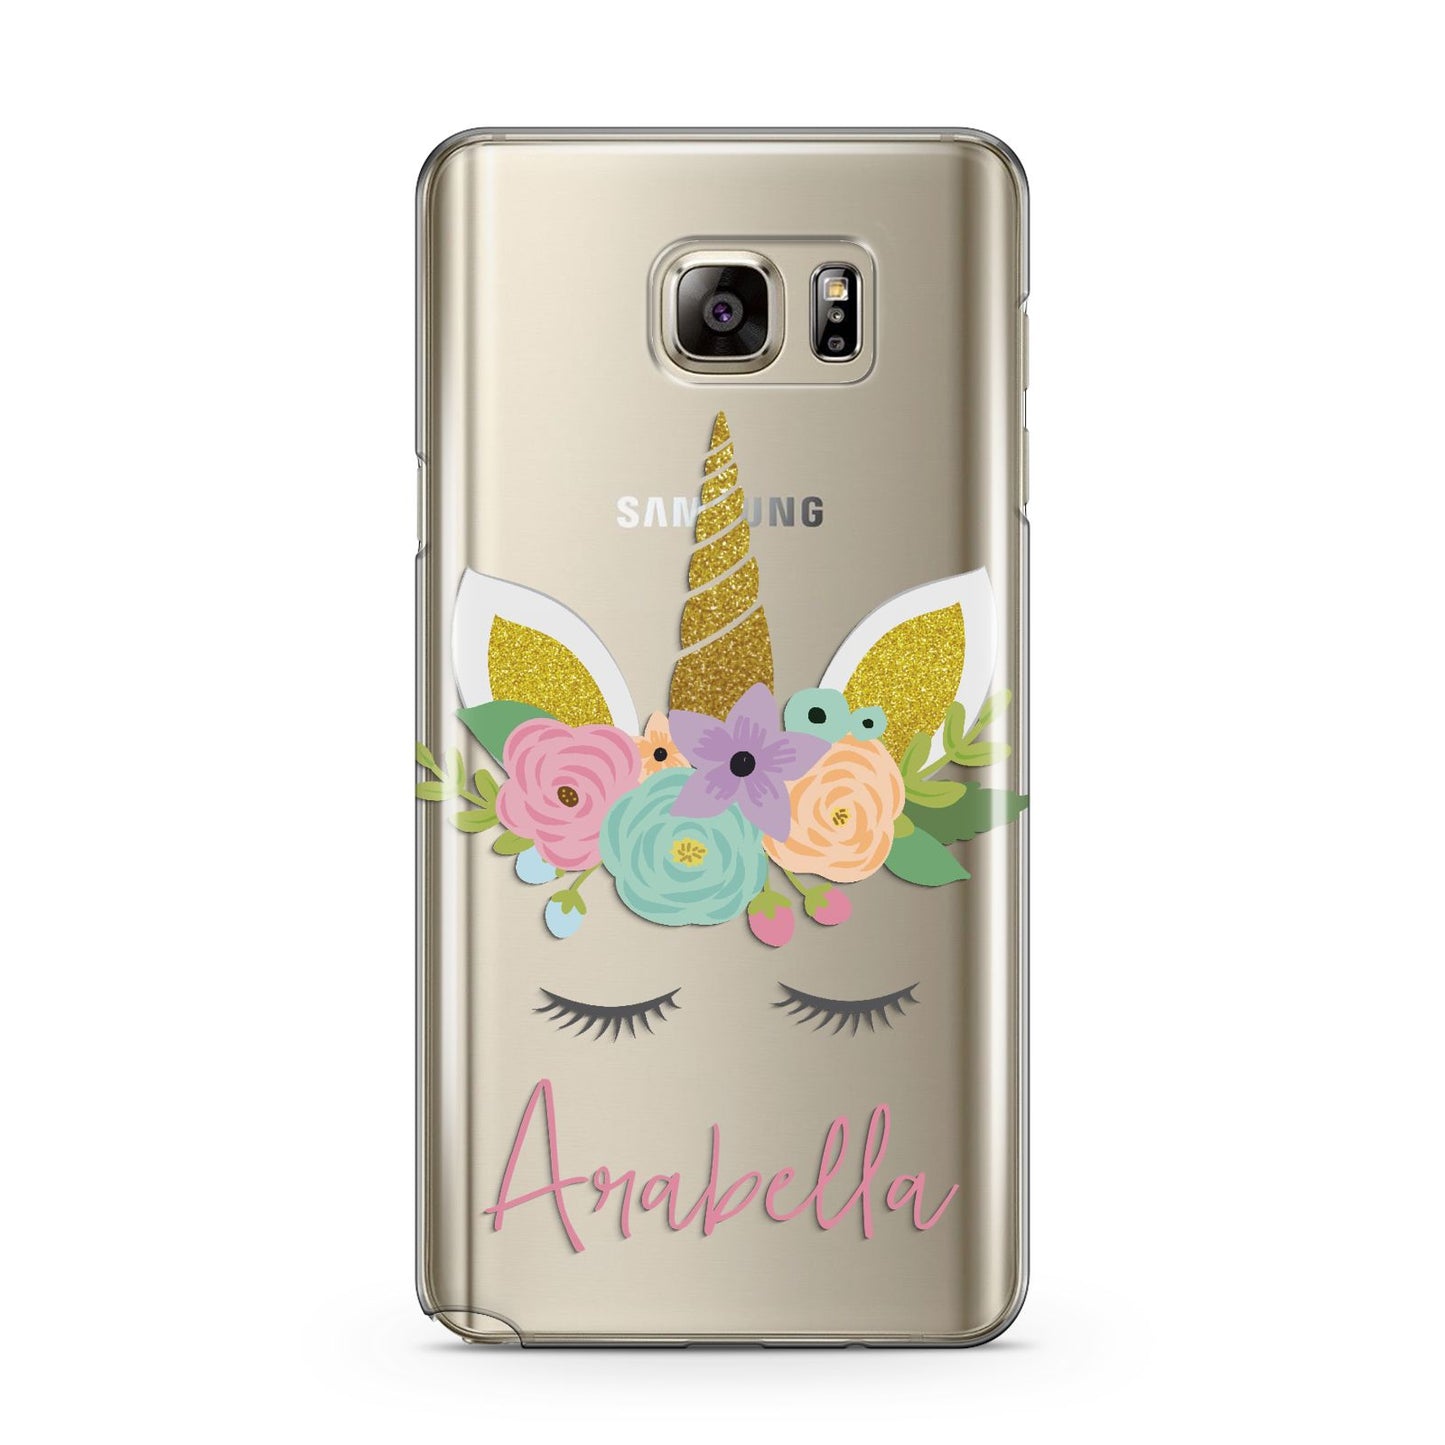 Personalised Unicorn Face Samsung Galaxy Note 5 Case